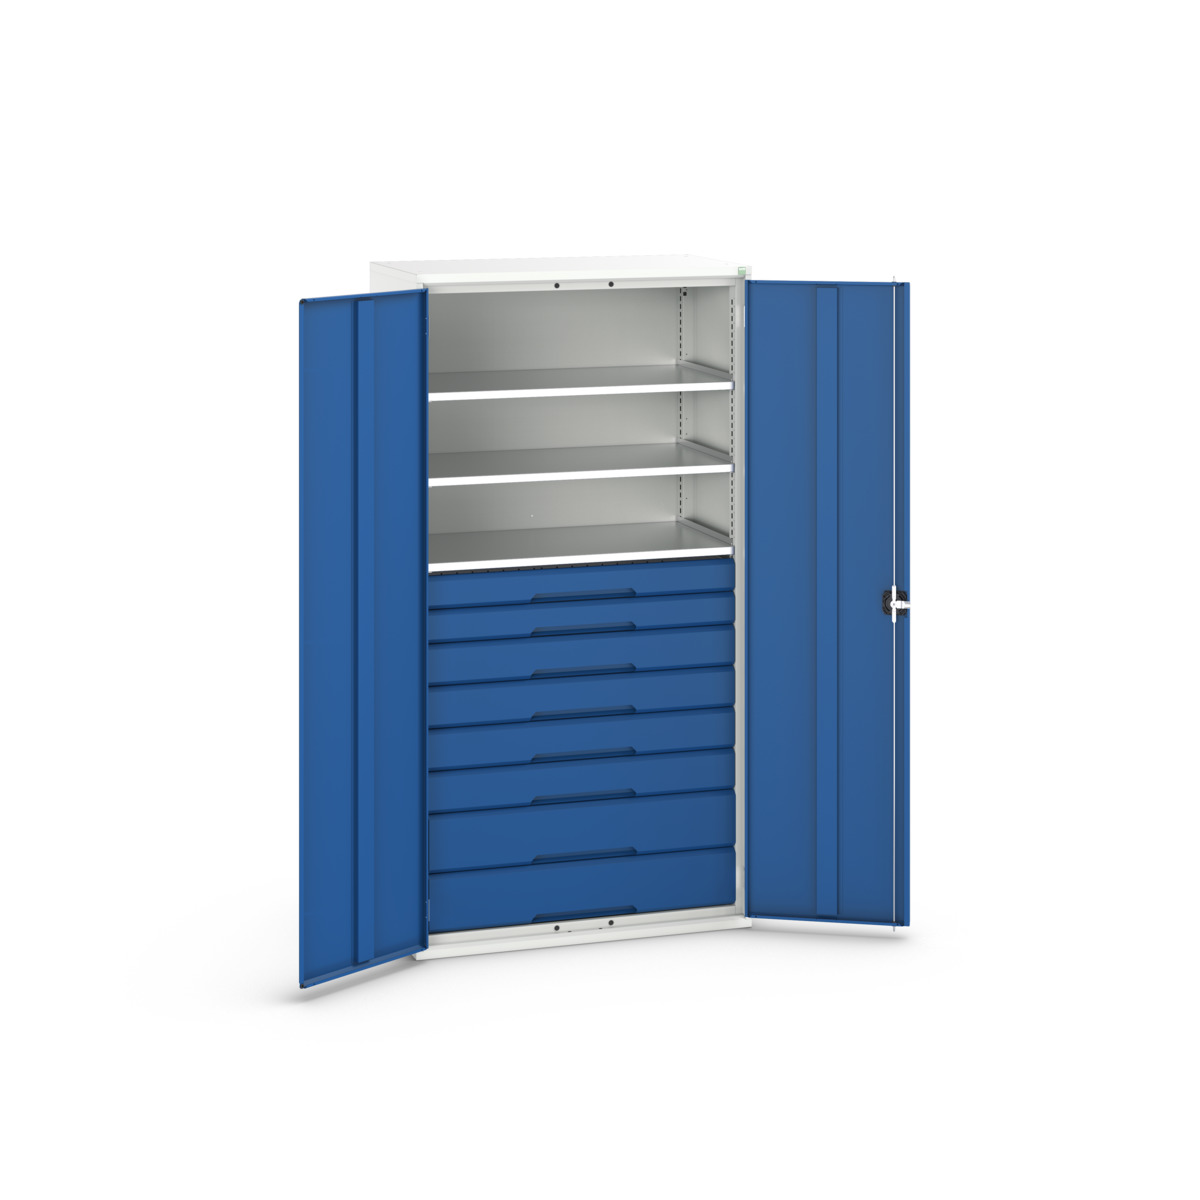 16926577.11 - verso kitted cupboard